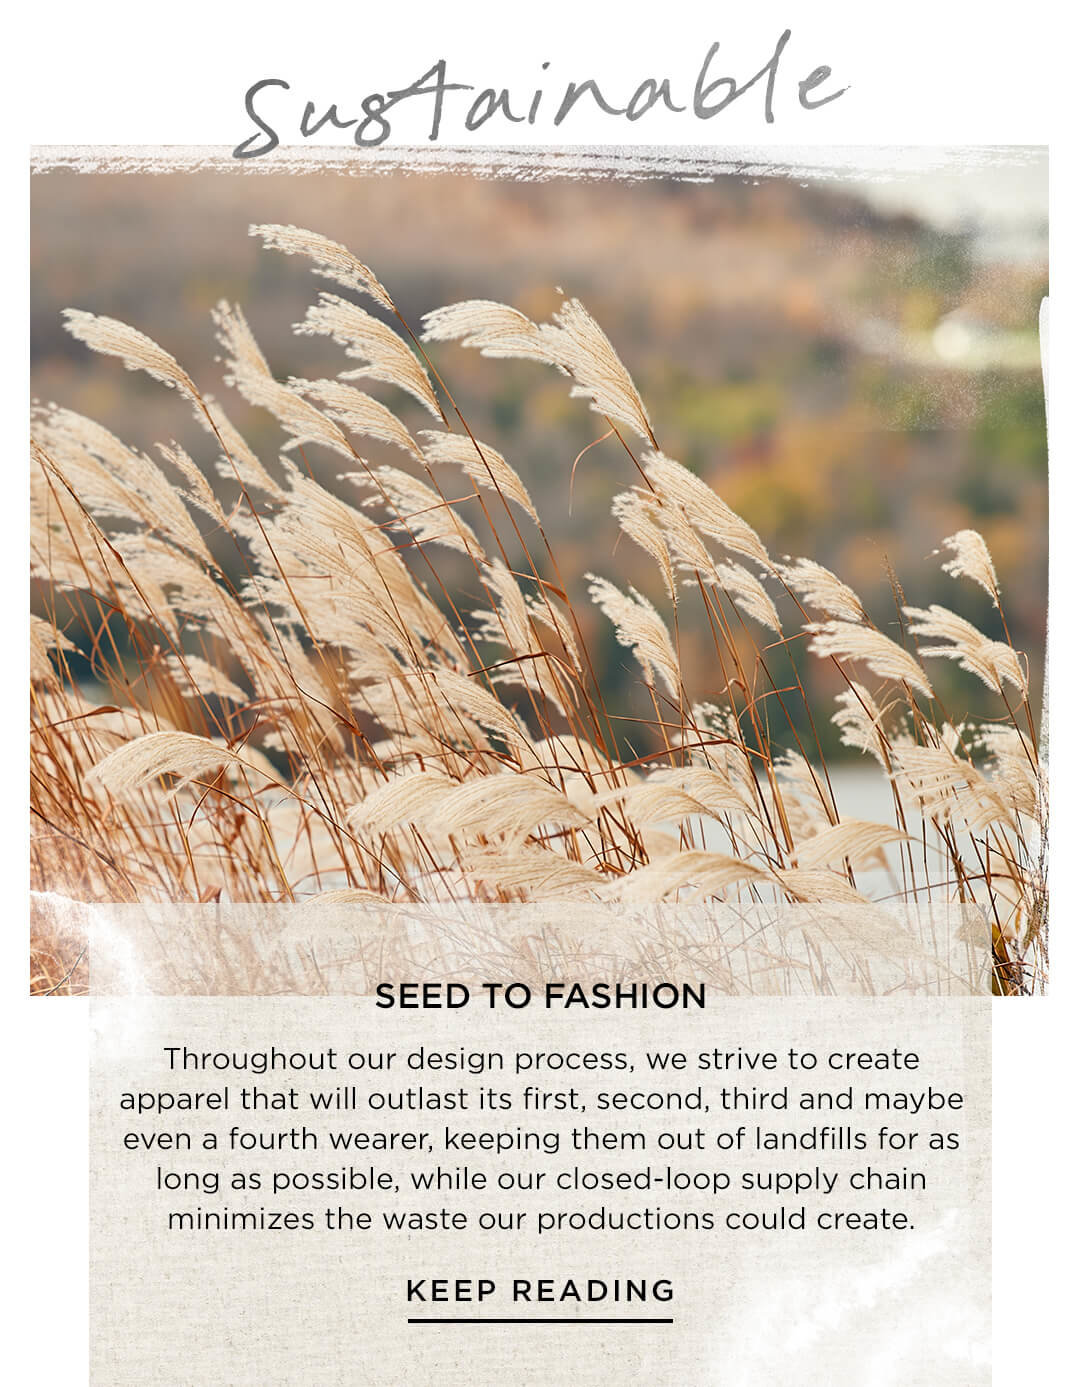 Seed to fashion: minimizing waste in production.